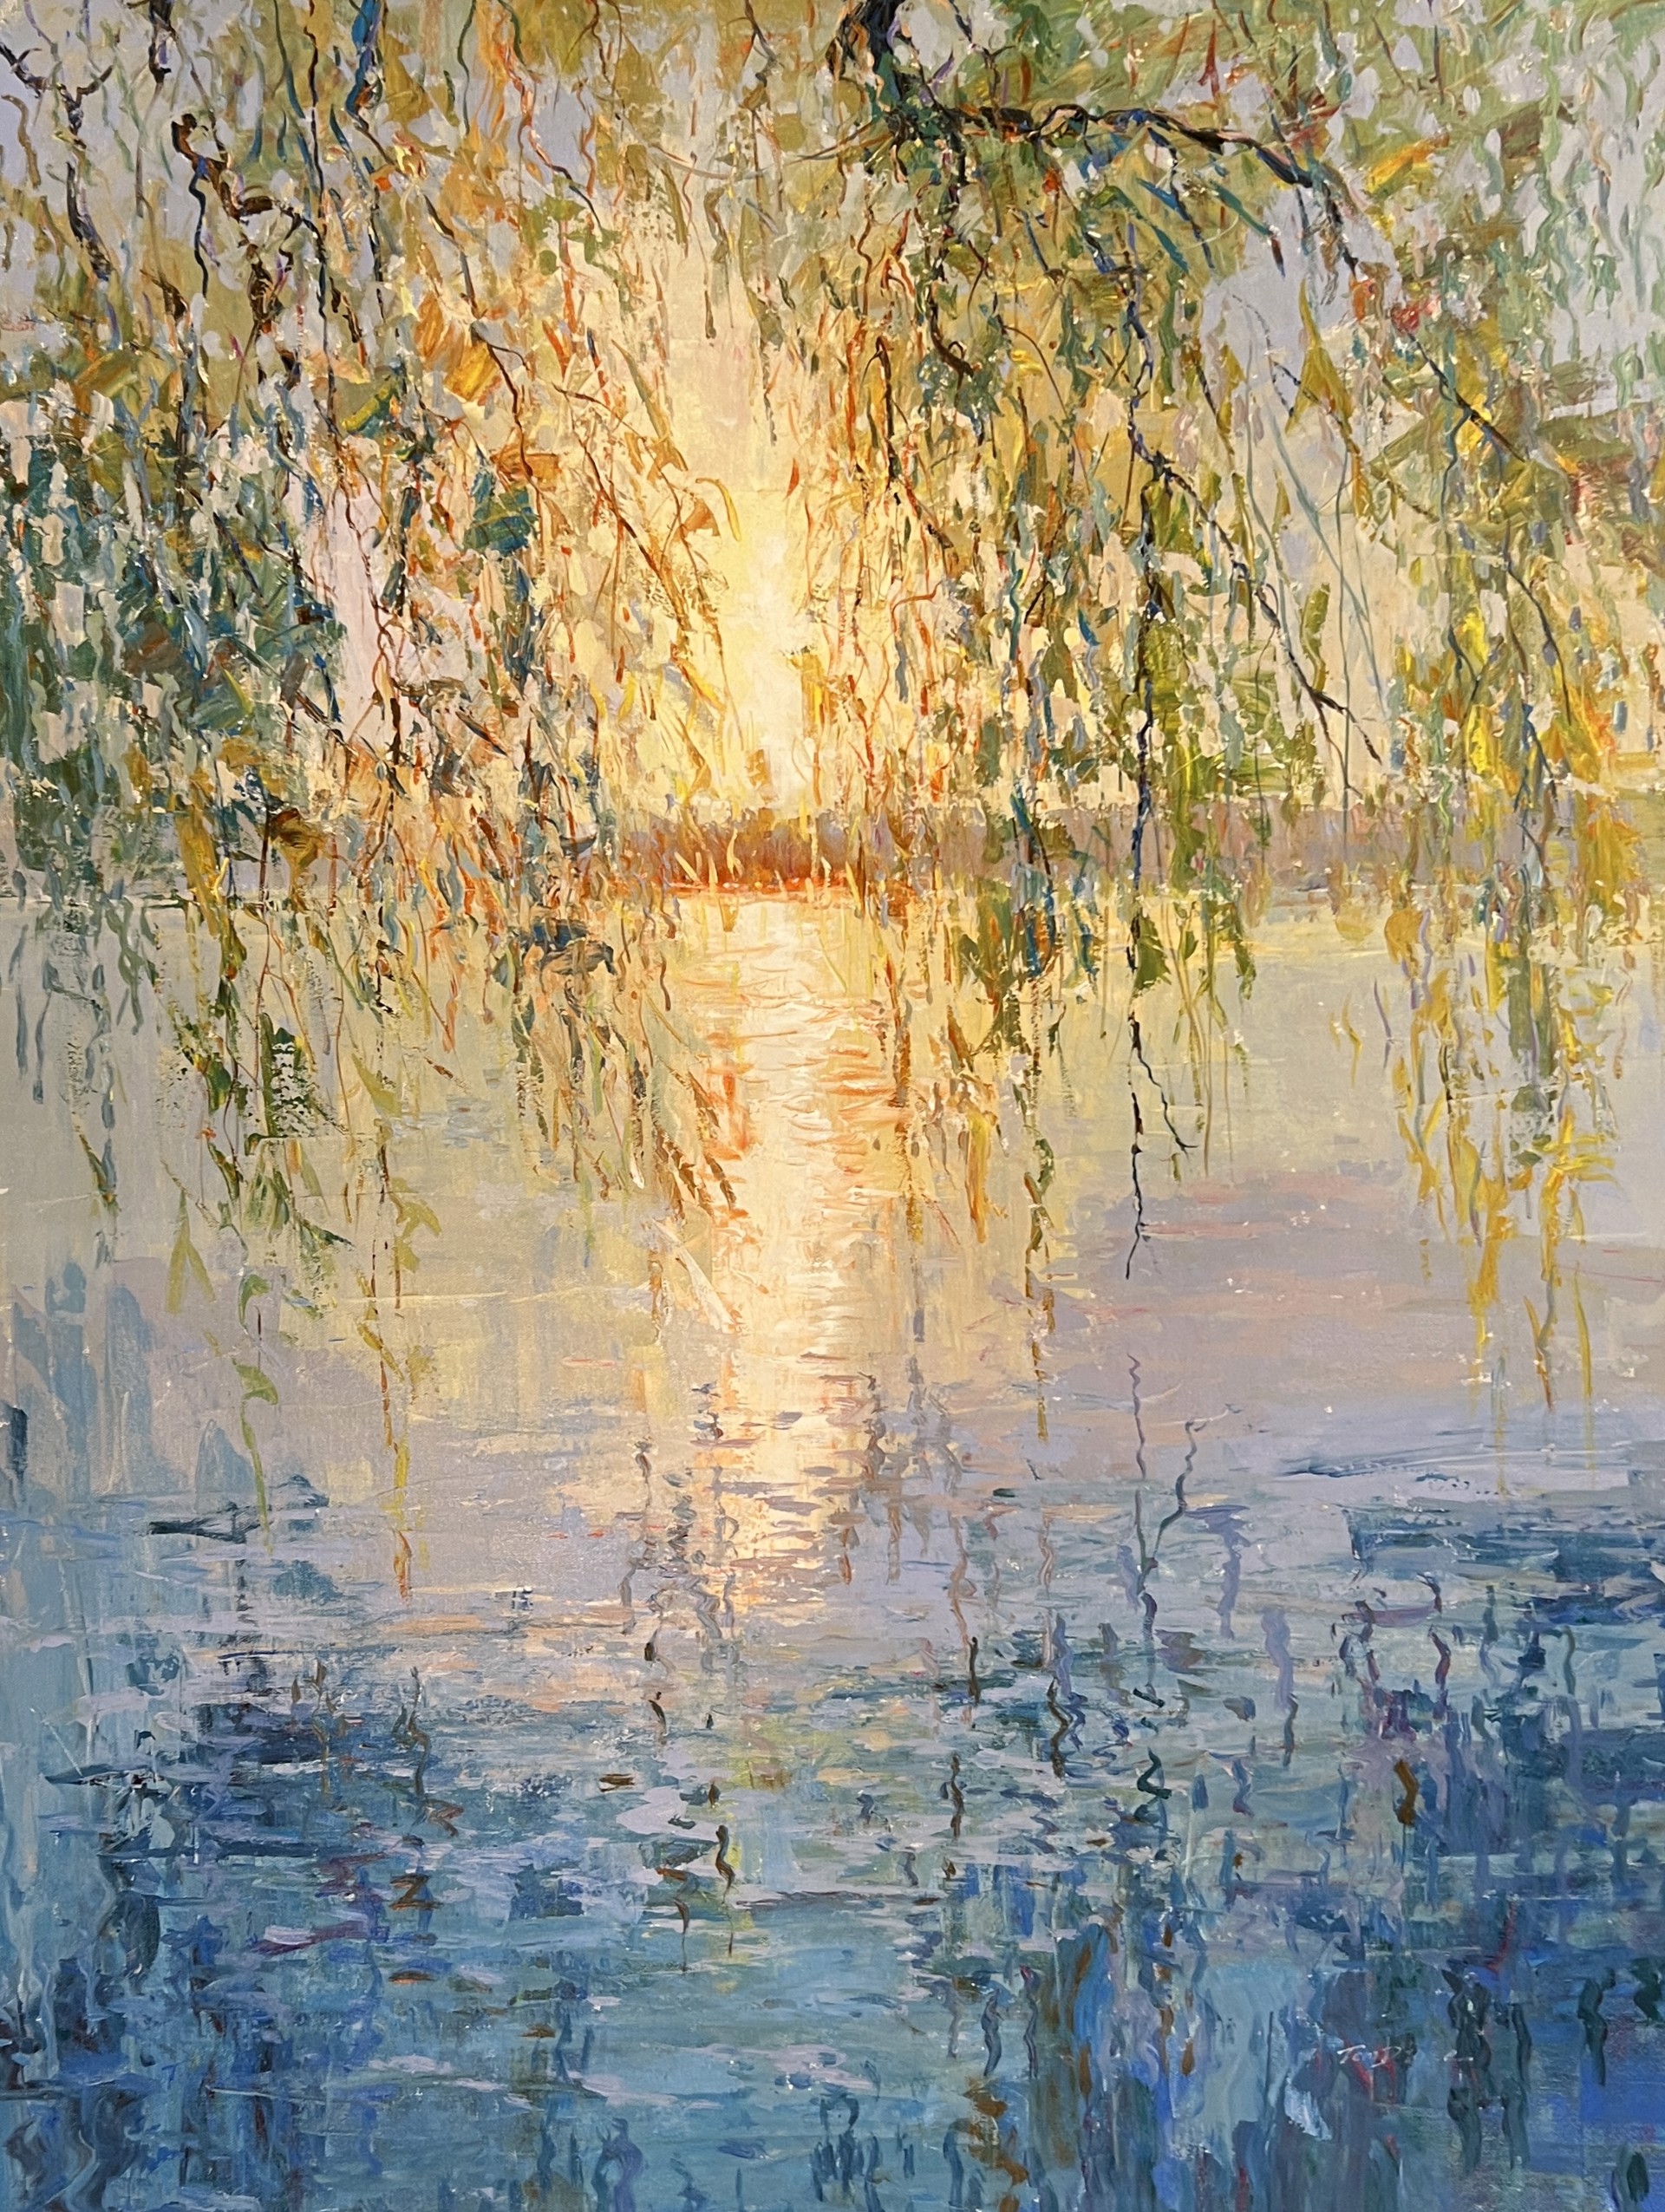 SUN THROUGH THE WILLOW by TOM DINTE